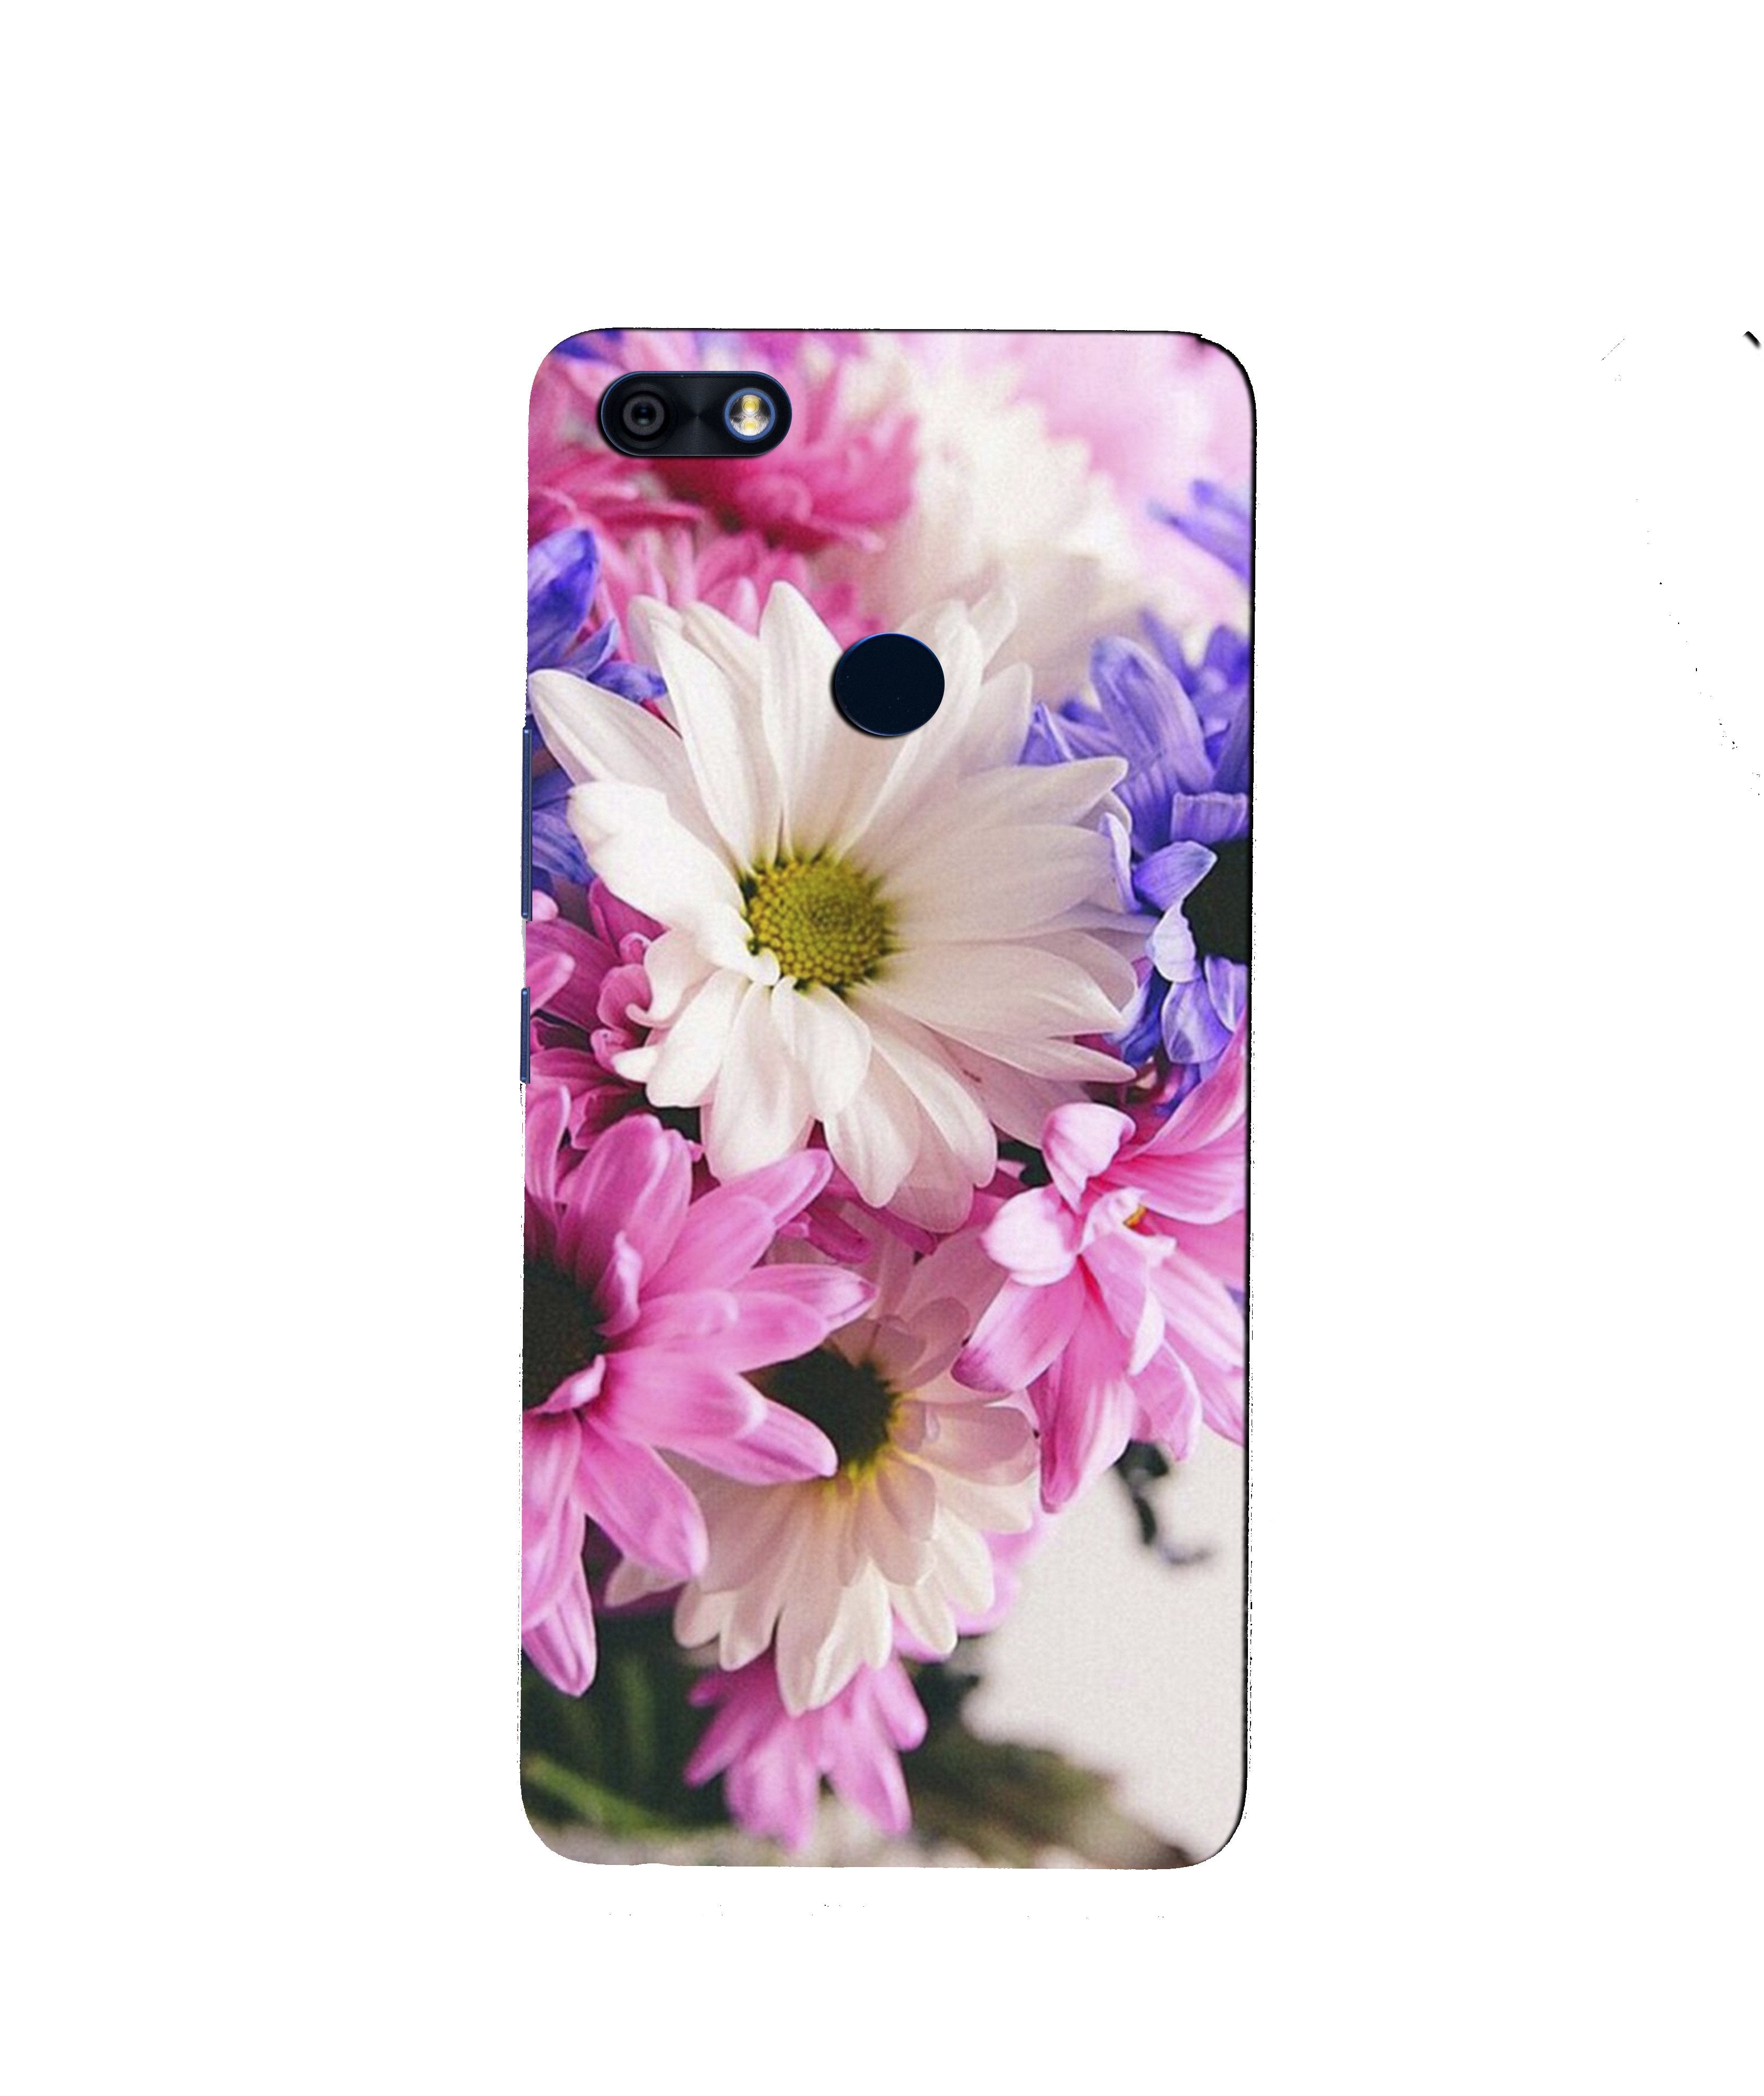 Coloful Daisy Case for Infinix Note 5 / Note 5 Pro